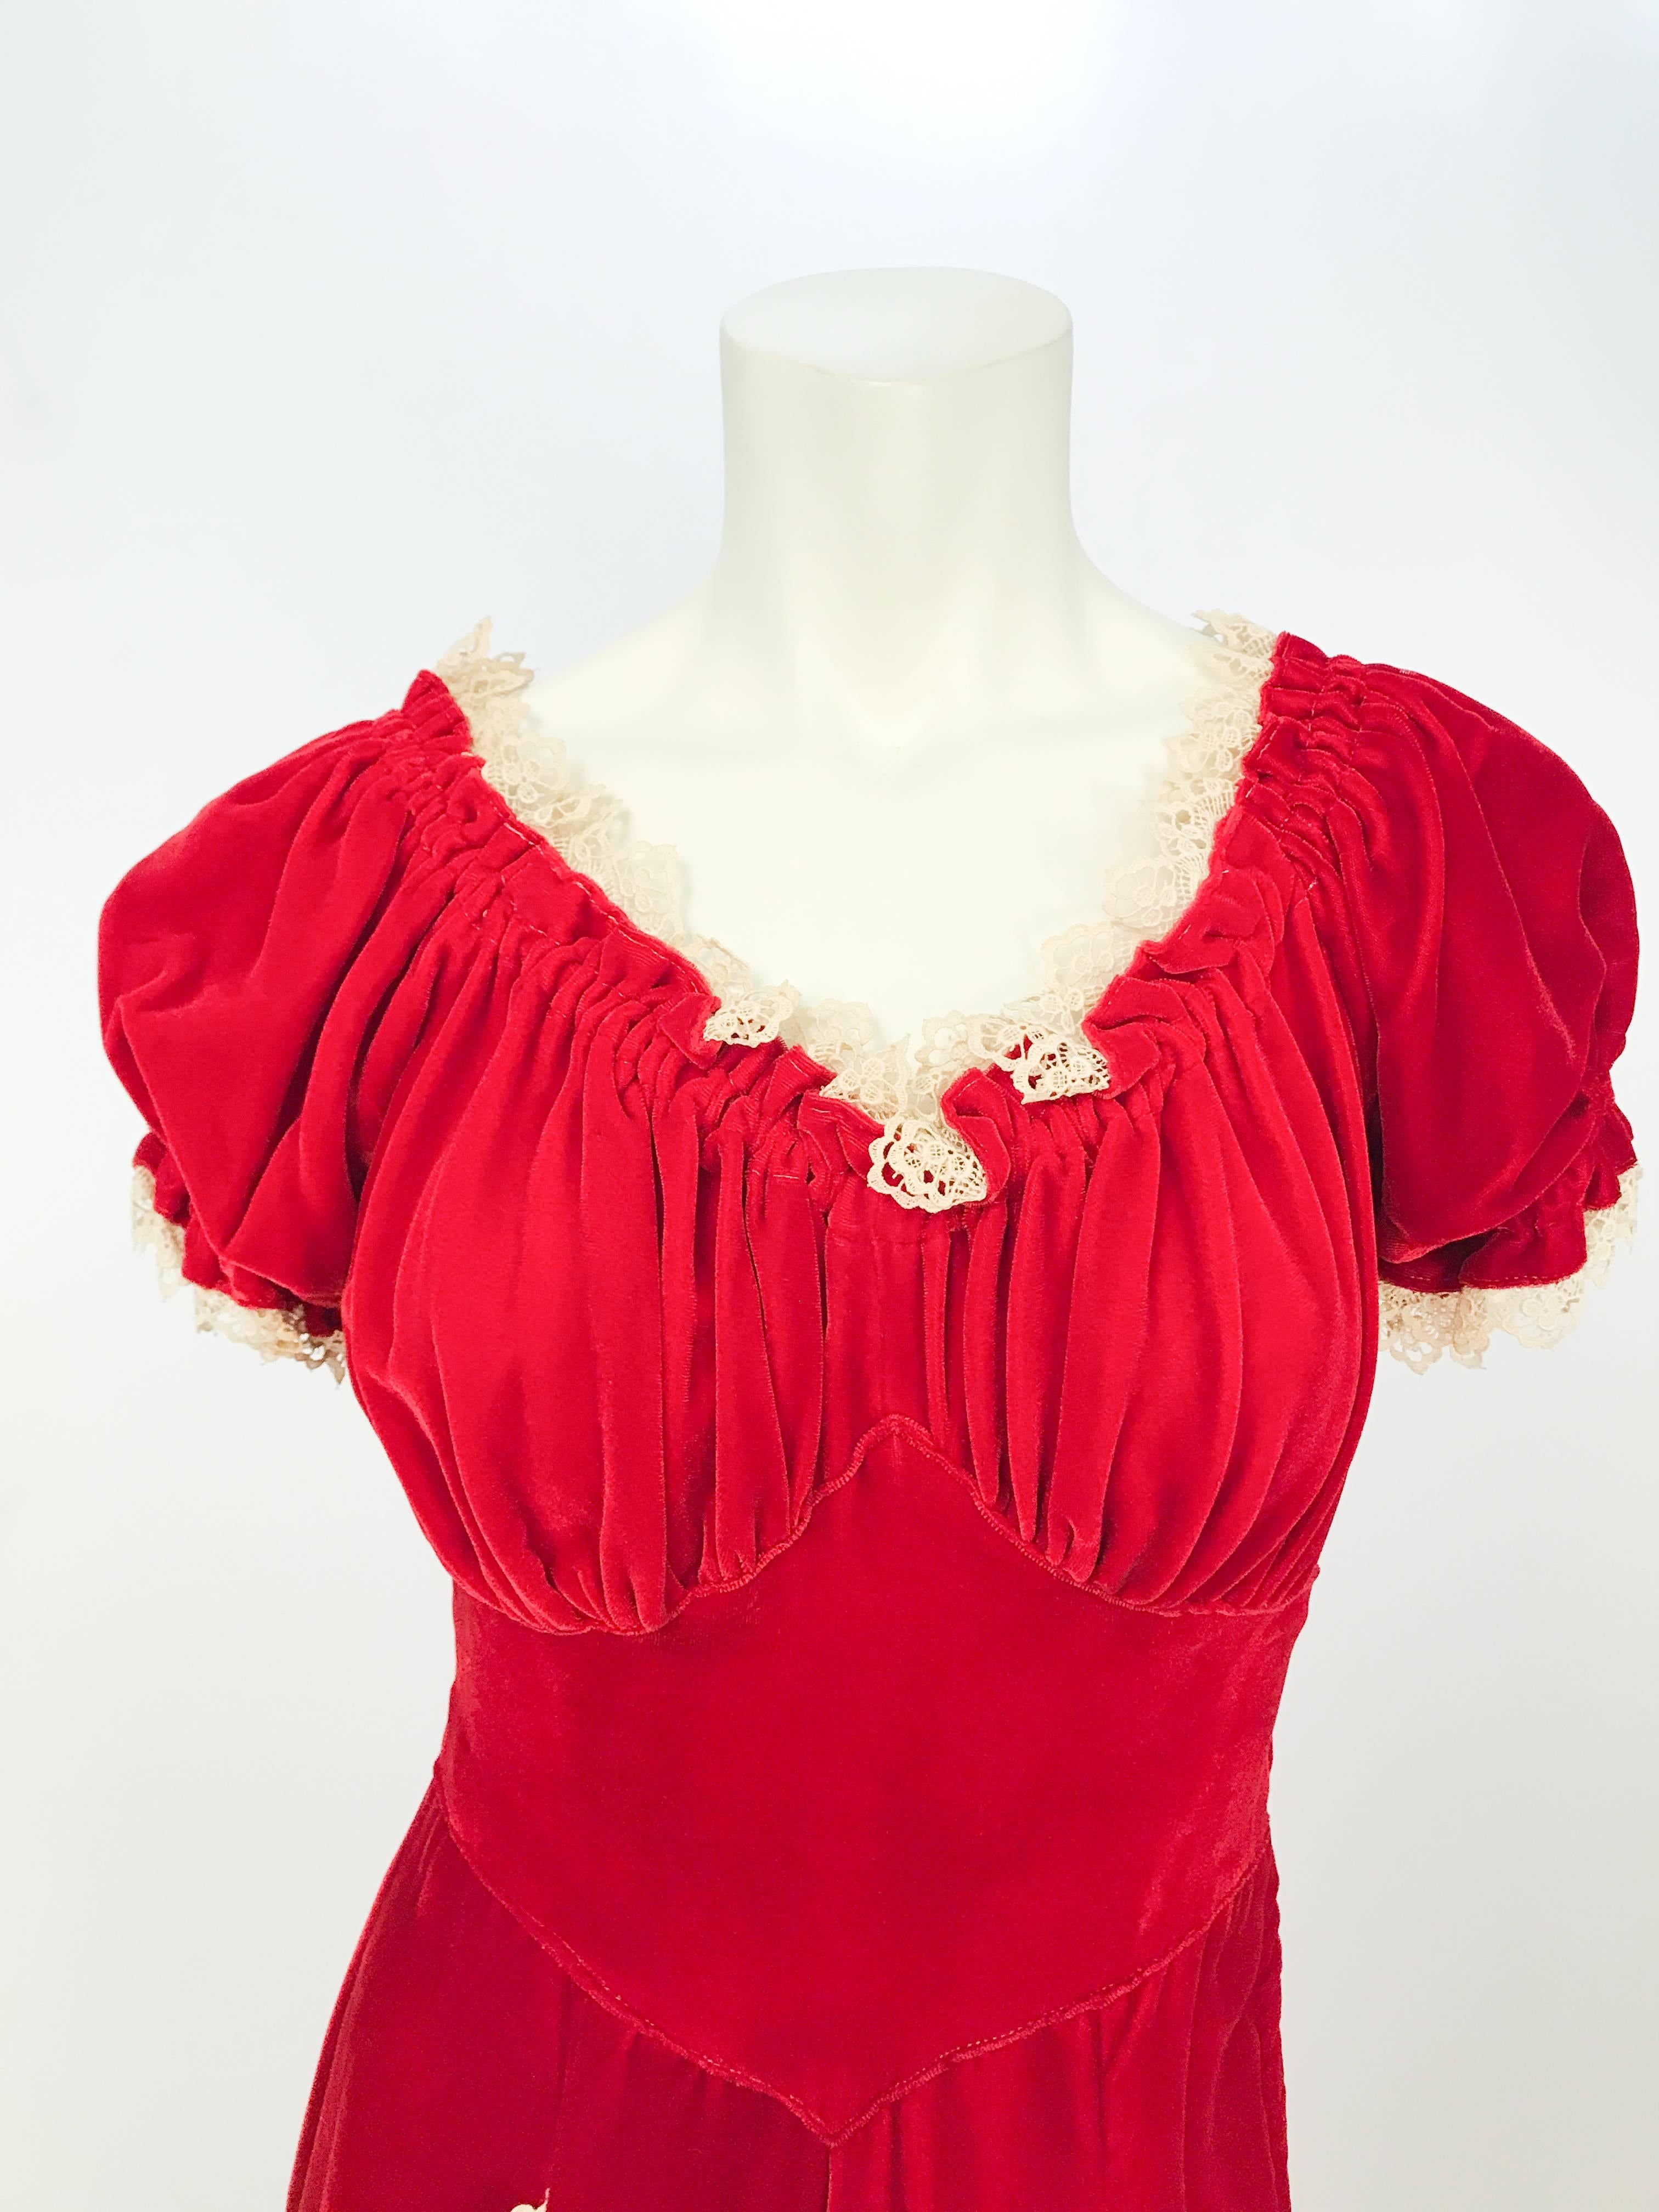 1930s Red Velvet and Lace Dress. Red velvet dress with machine lace sleeves, pockets, and neckline. Gathered around the bust and belted waist.